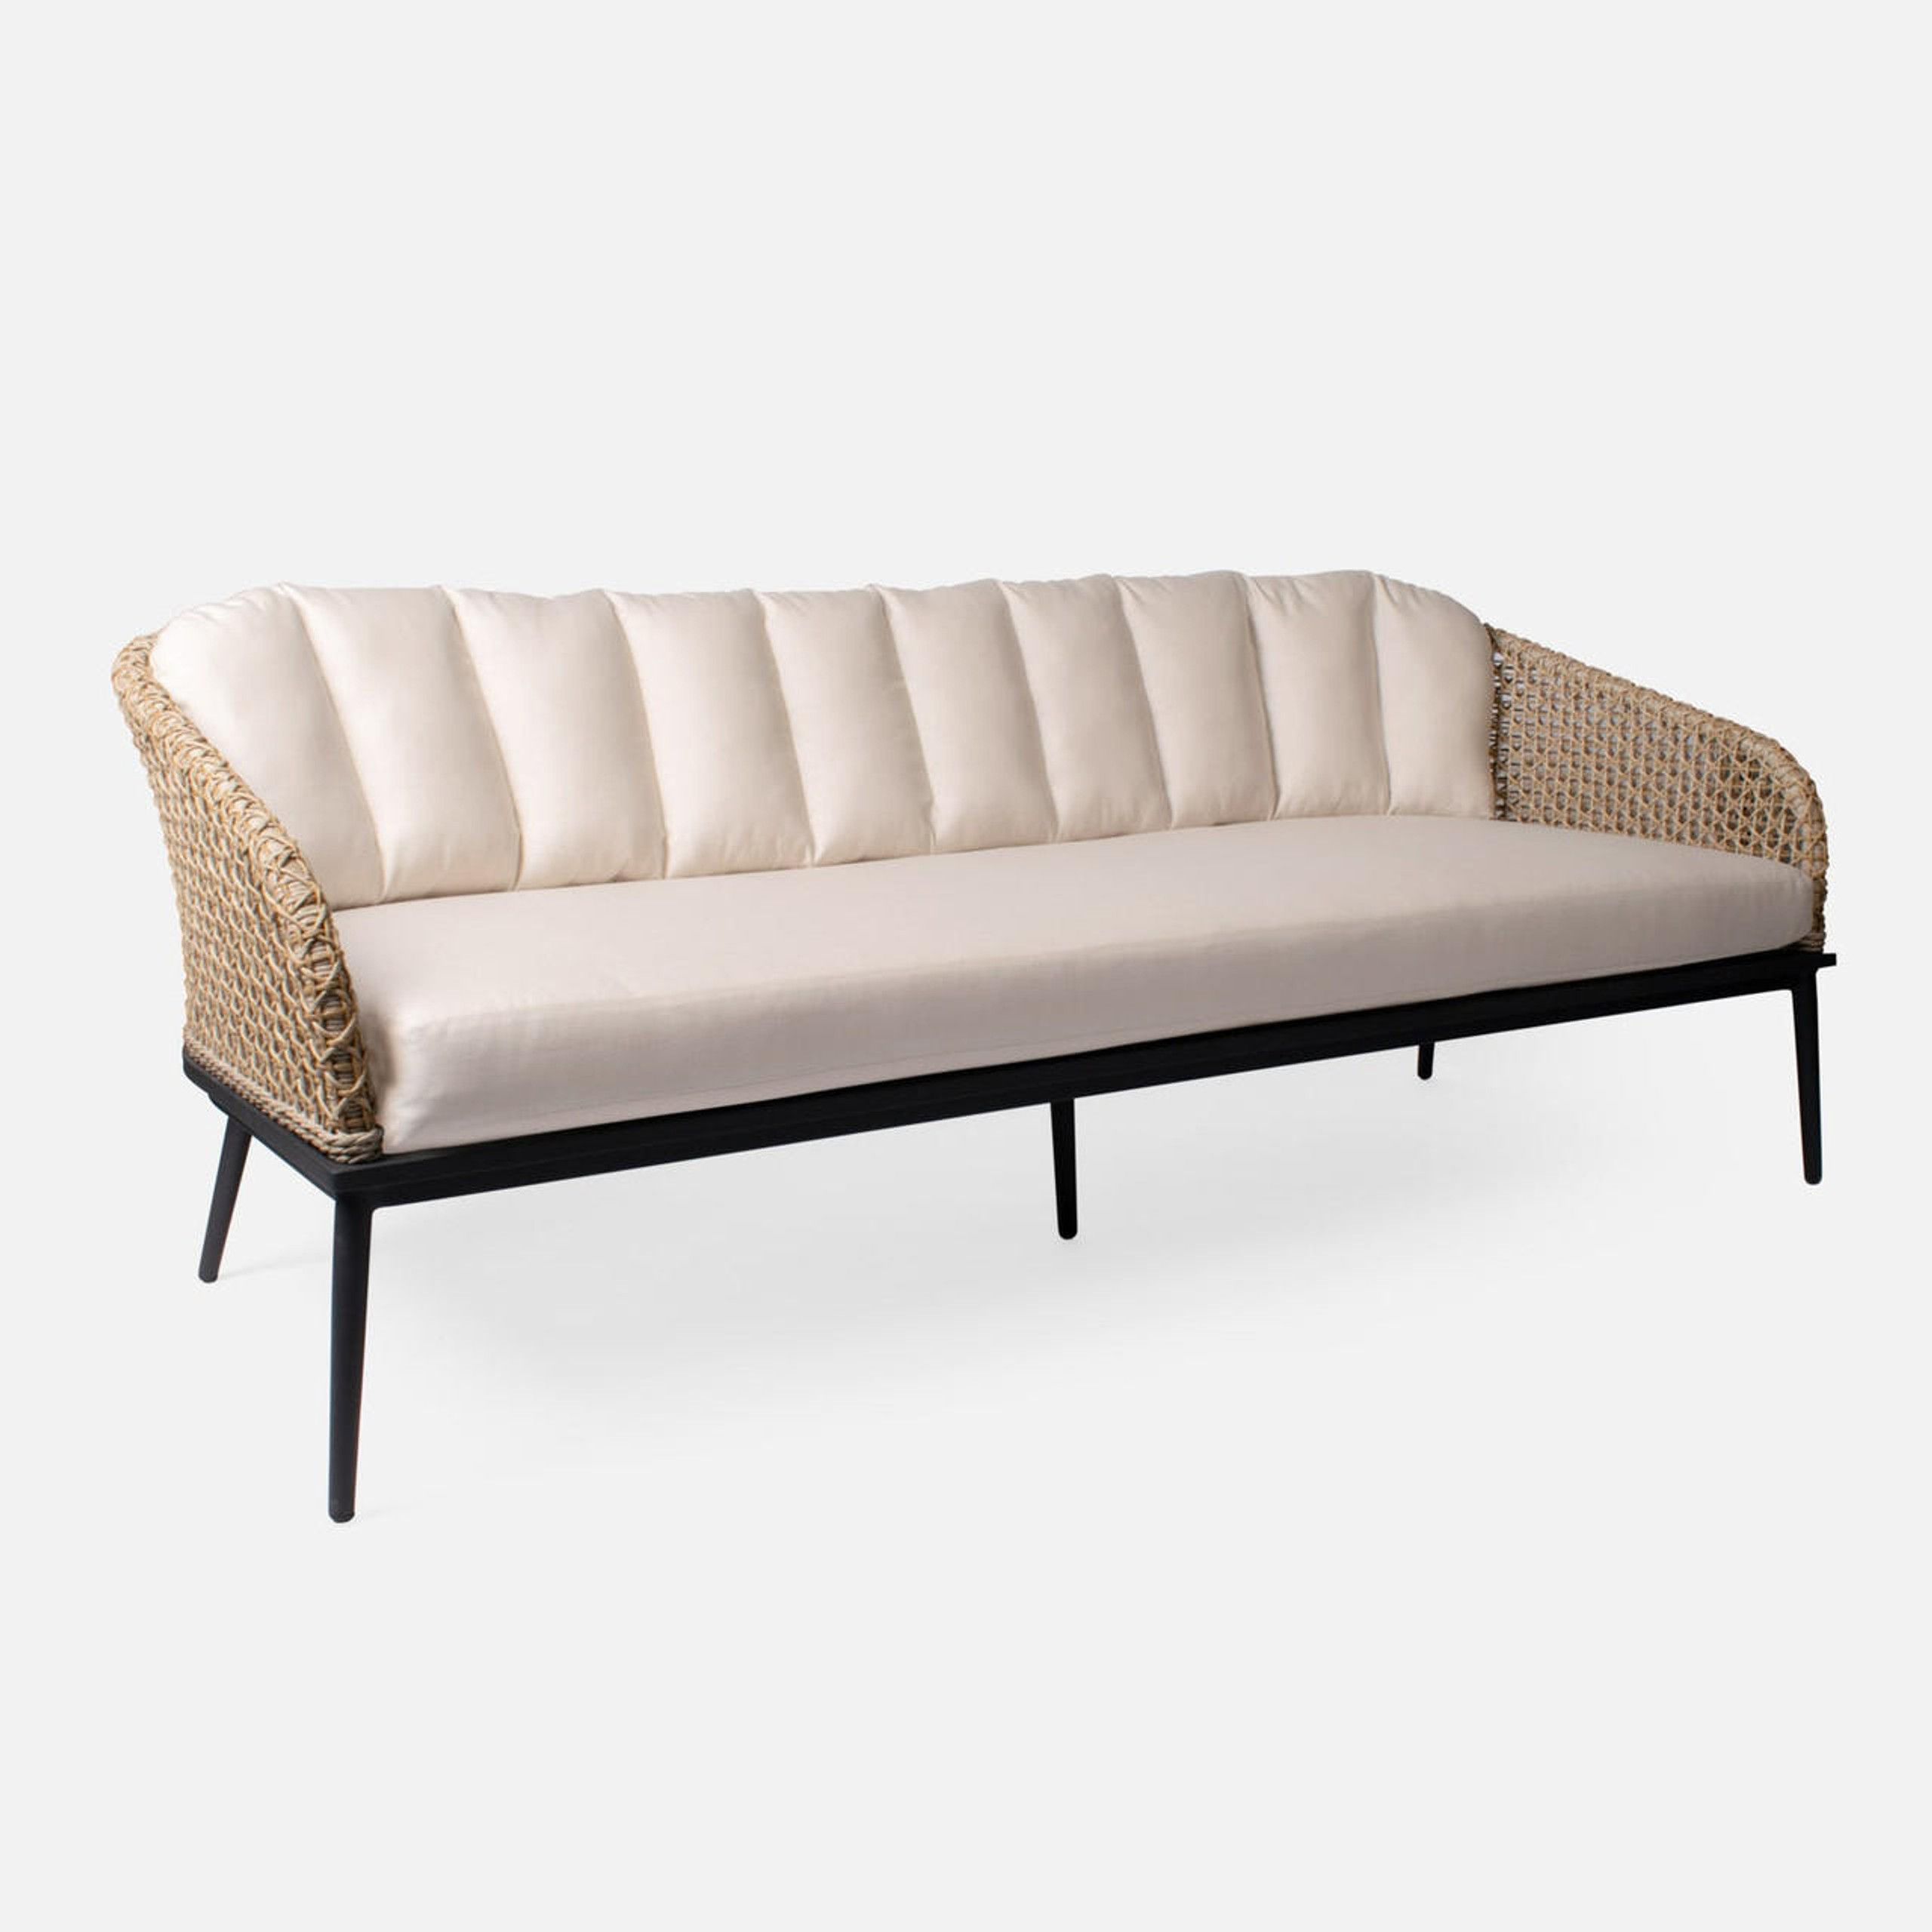 Leandre Outdoor Sofa (Interchangeable Cushions)
                    
    
        
    
    
    ... | Belle and June